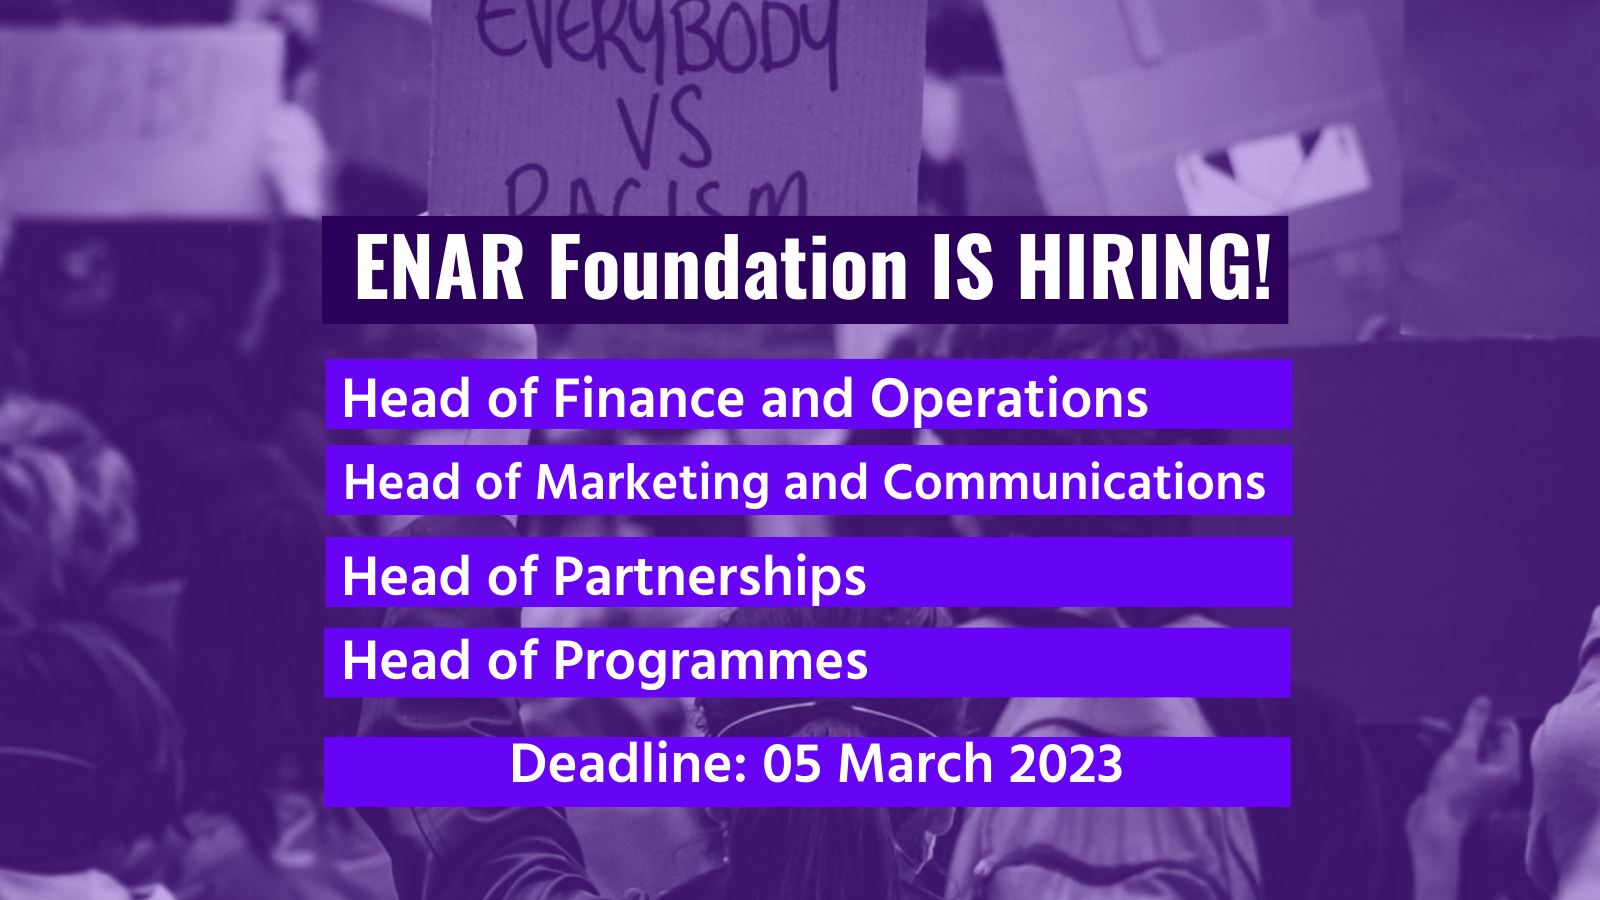 Enar Foundation now hiring different positions vacancies anti-racism